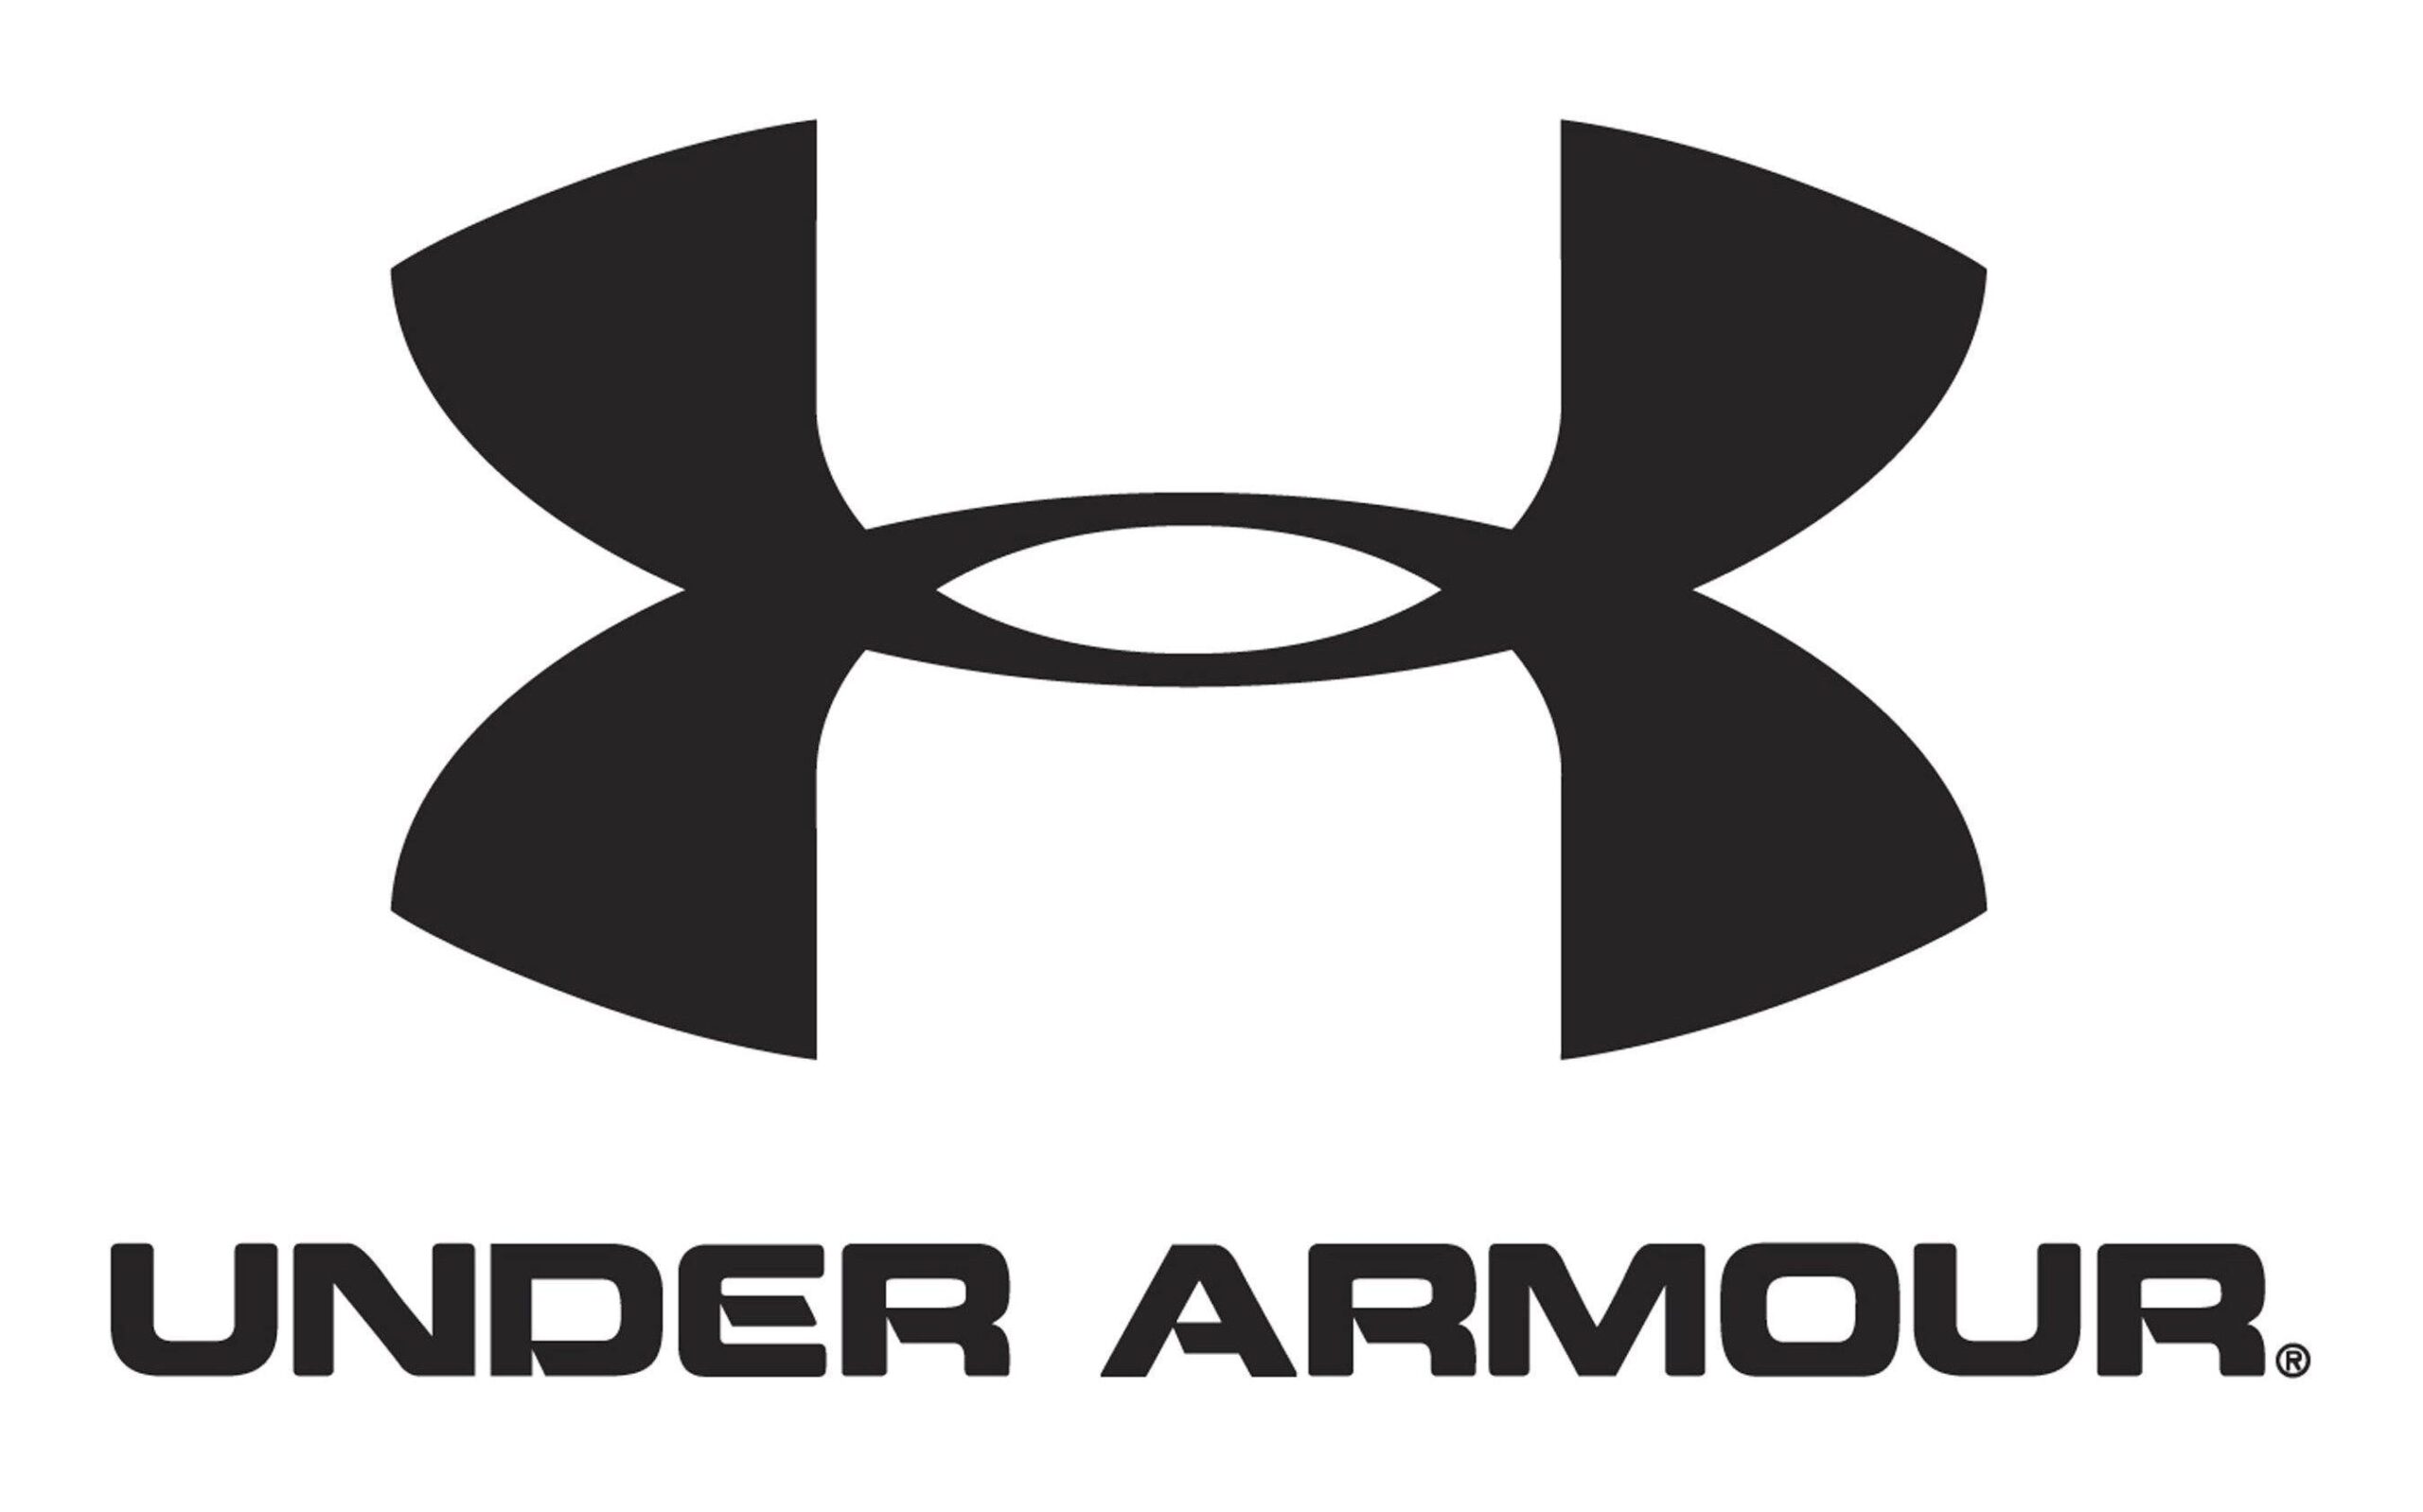 Under Armour Best Wallpaper Hd For Pc